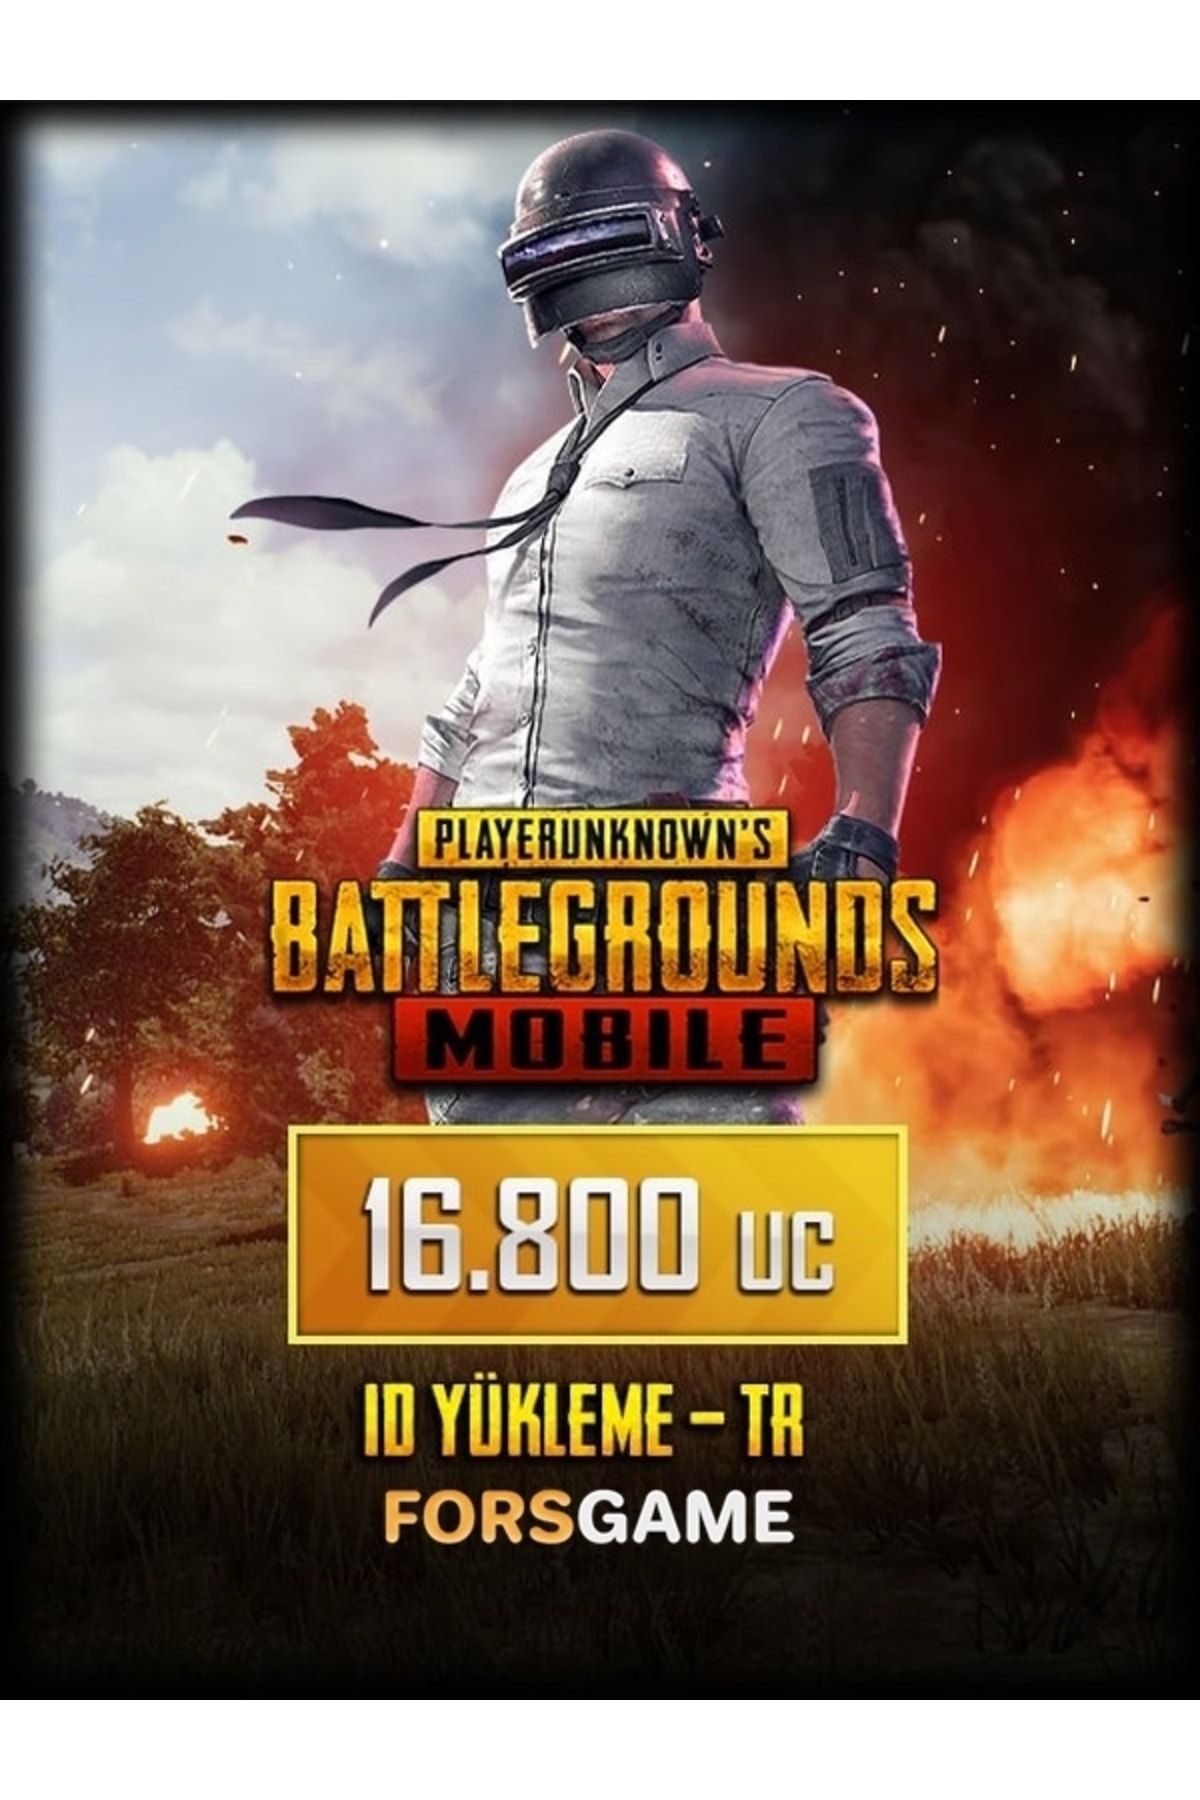 fors game Pubg Mobile 16800 Uc Id Yükleme Tr